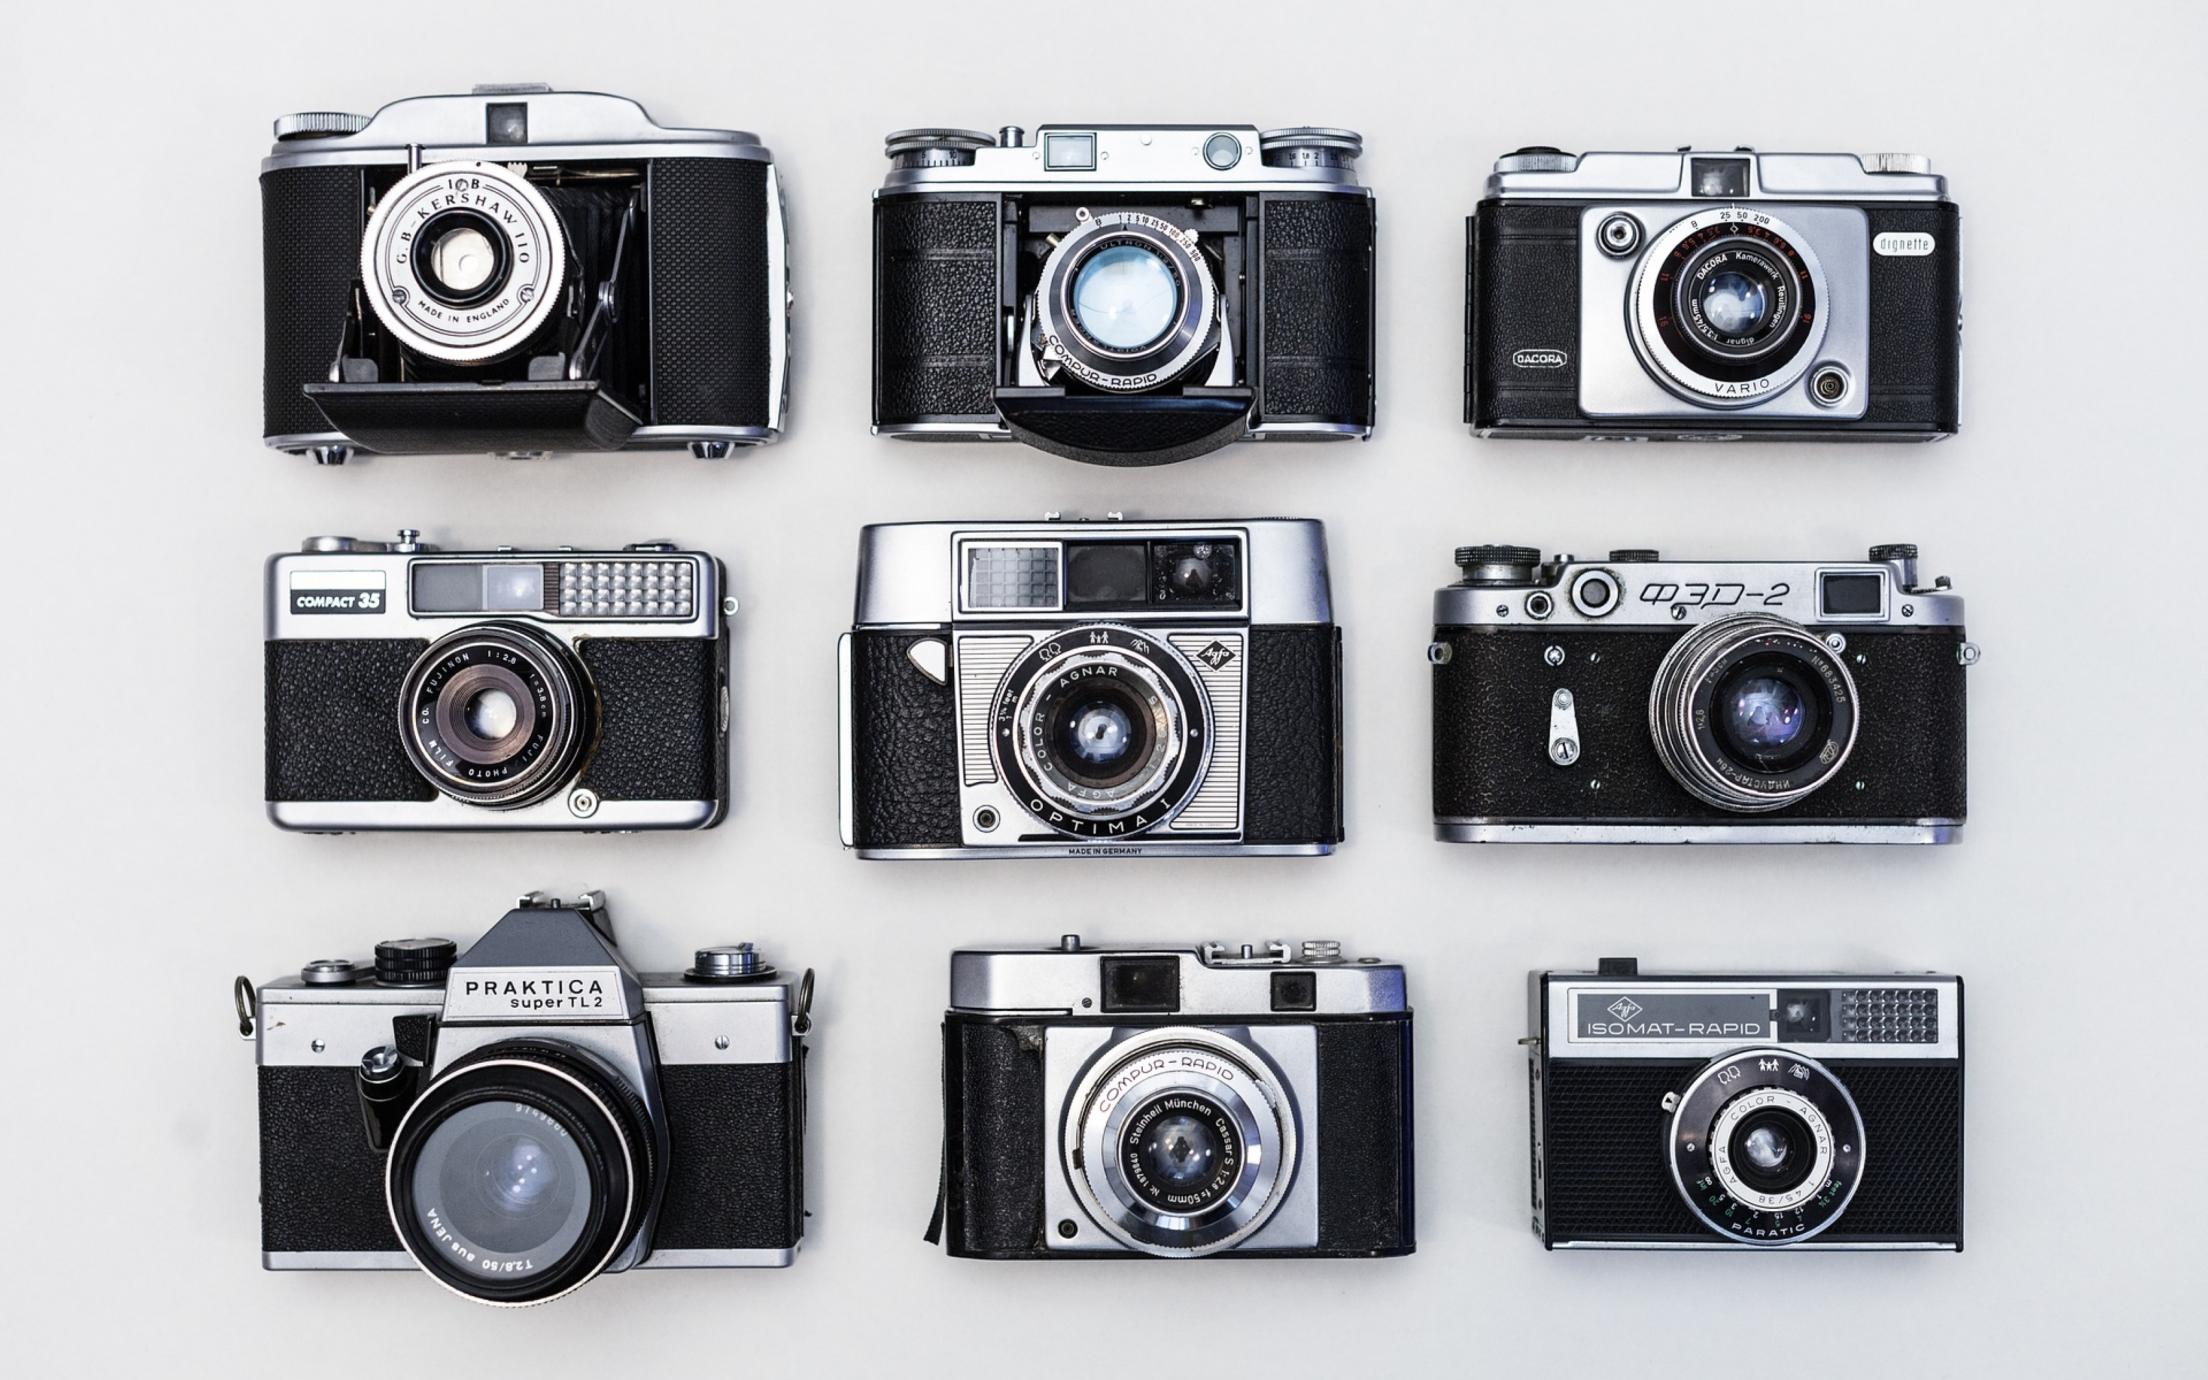 Nine cameras in a 3 X 3 grid on a gray background